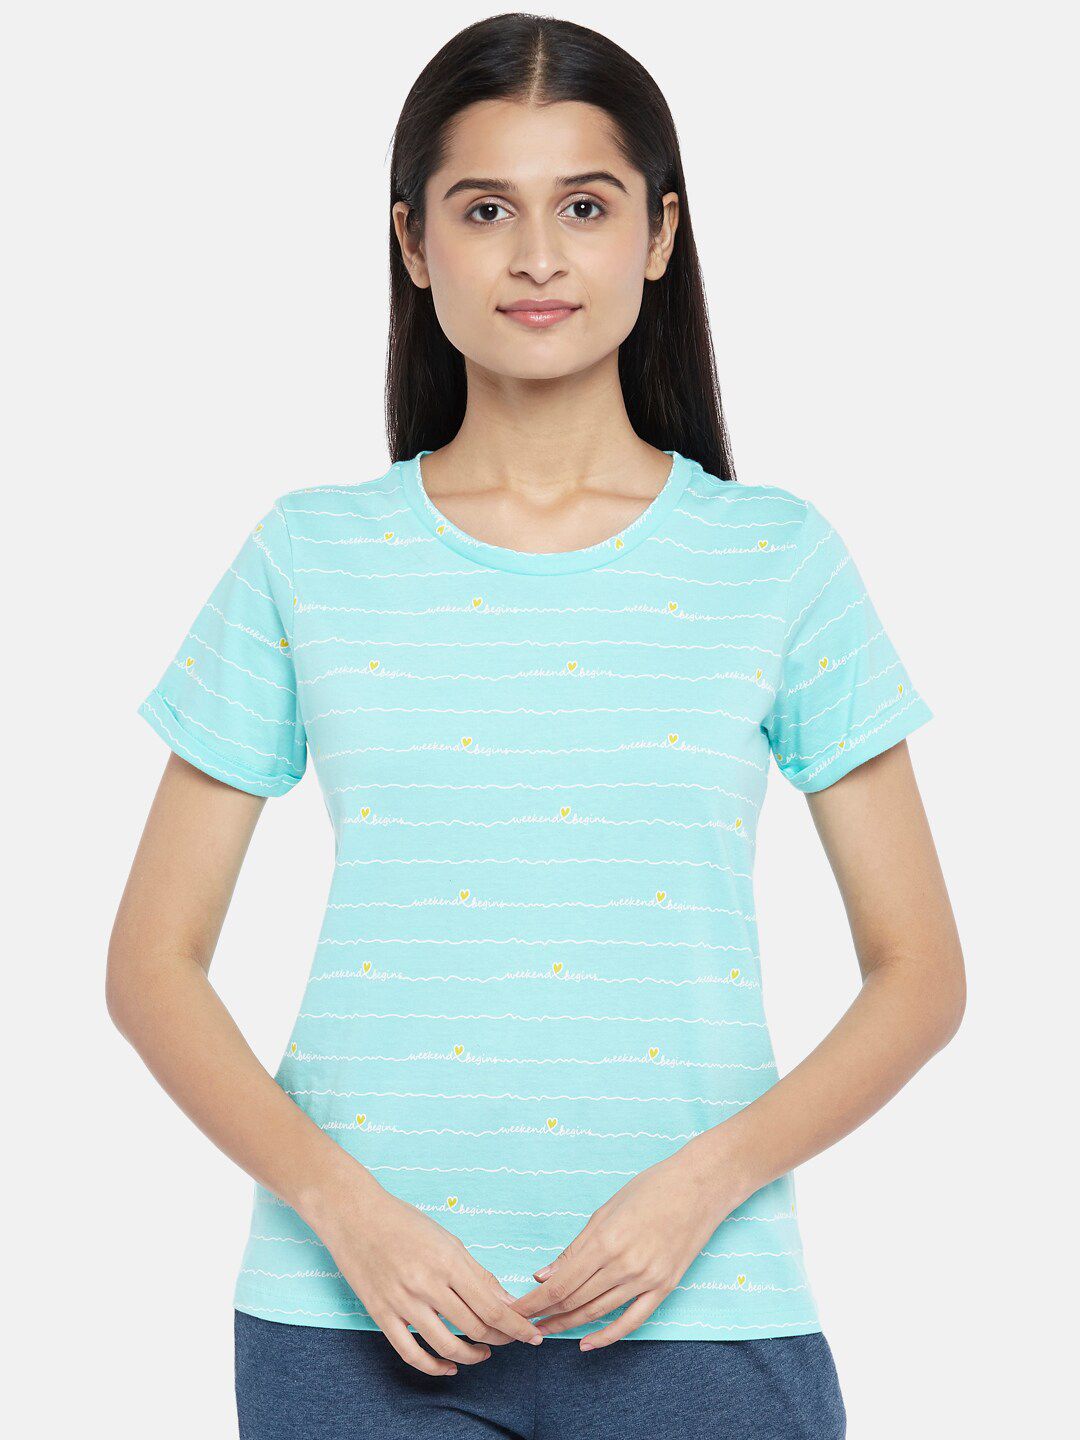 Dreamz by Pantaloons Blue Striped Lounge tshirt Price in India